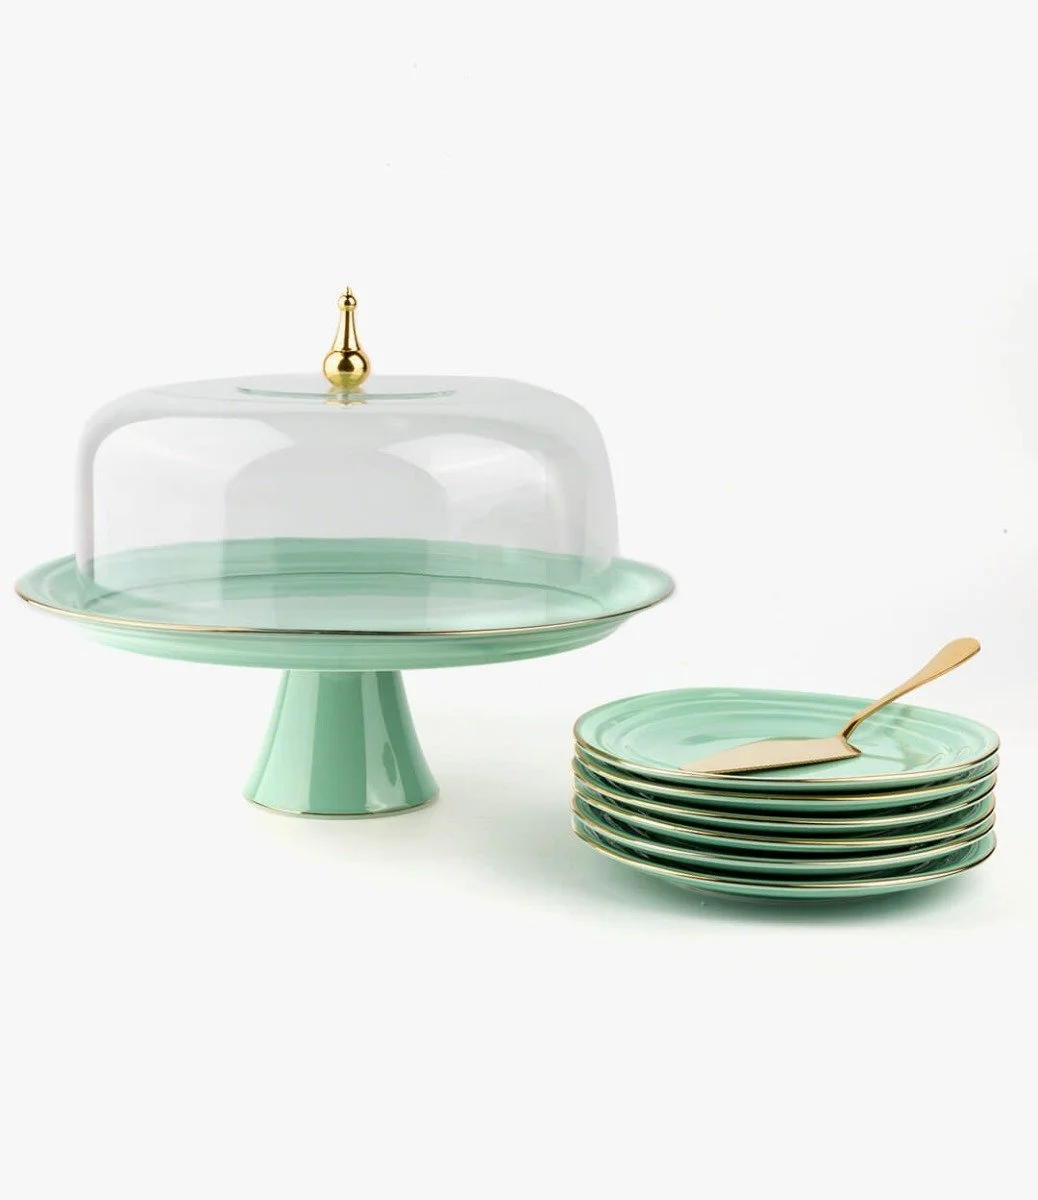 Teal - Cake Serving Sets From Harmony